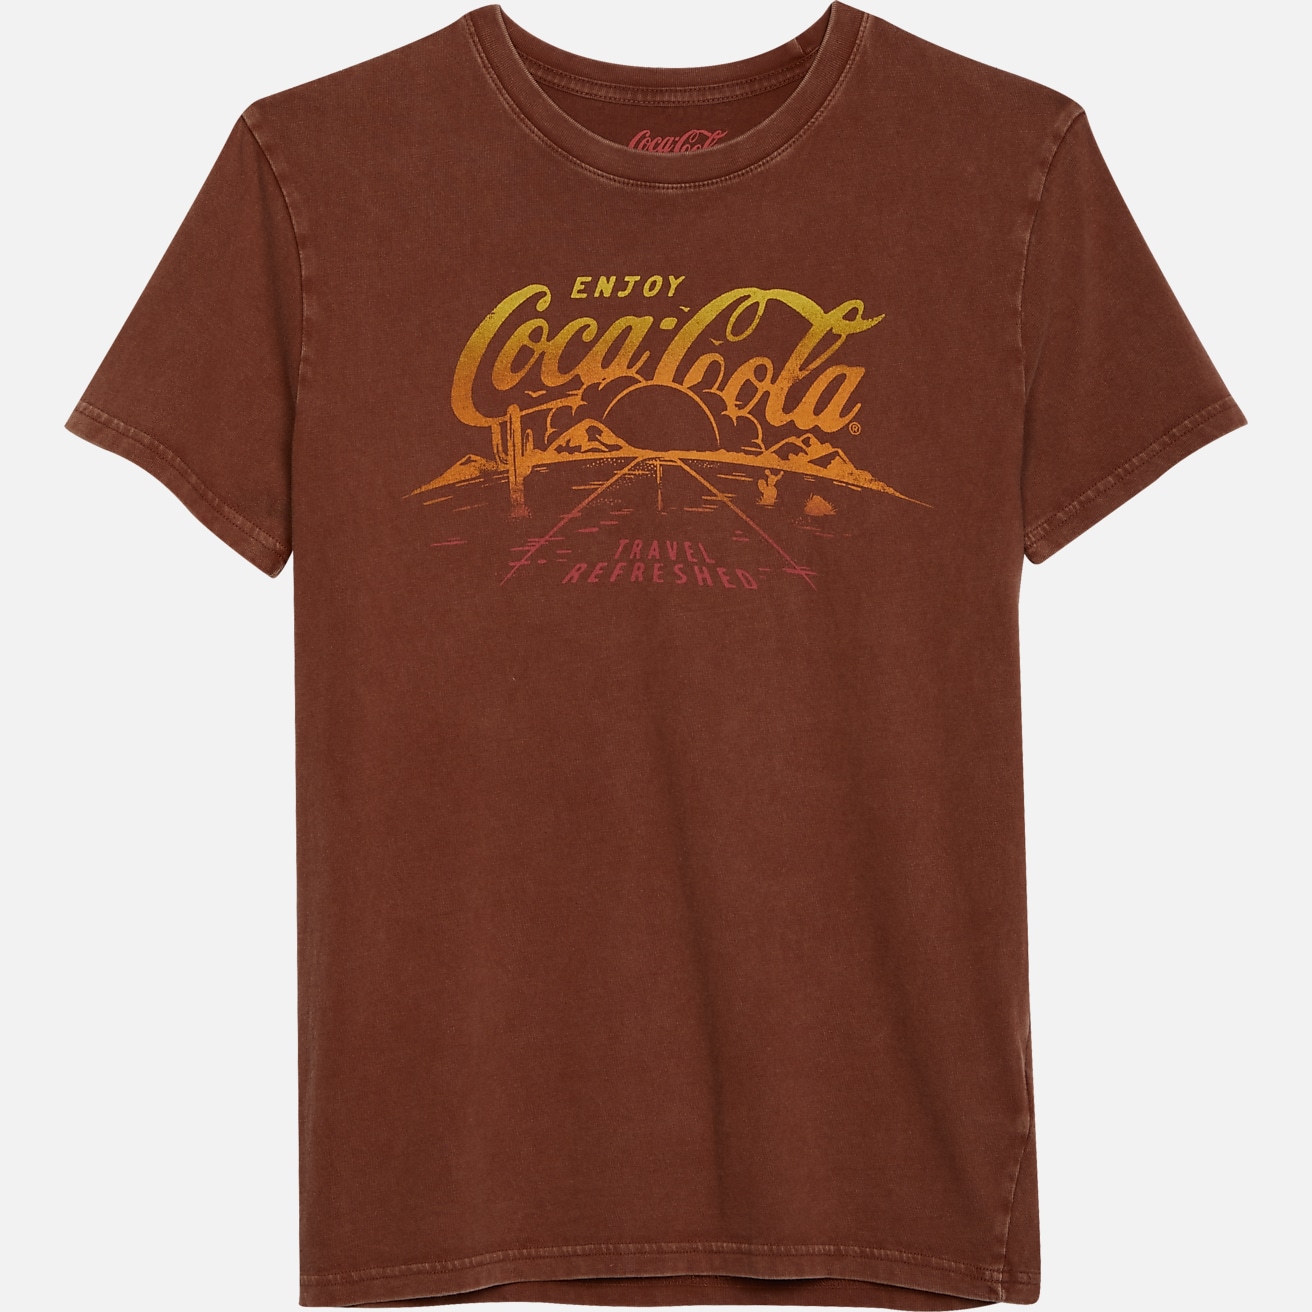 Lucky Brand Classic Fit Coca-Cola Road T-Shirt, All Sale